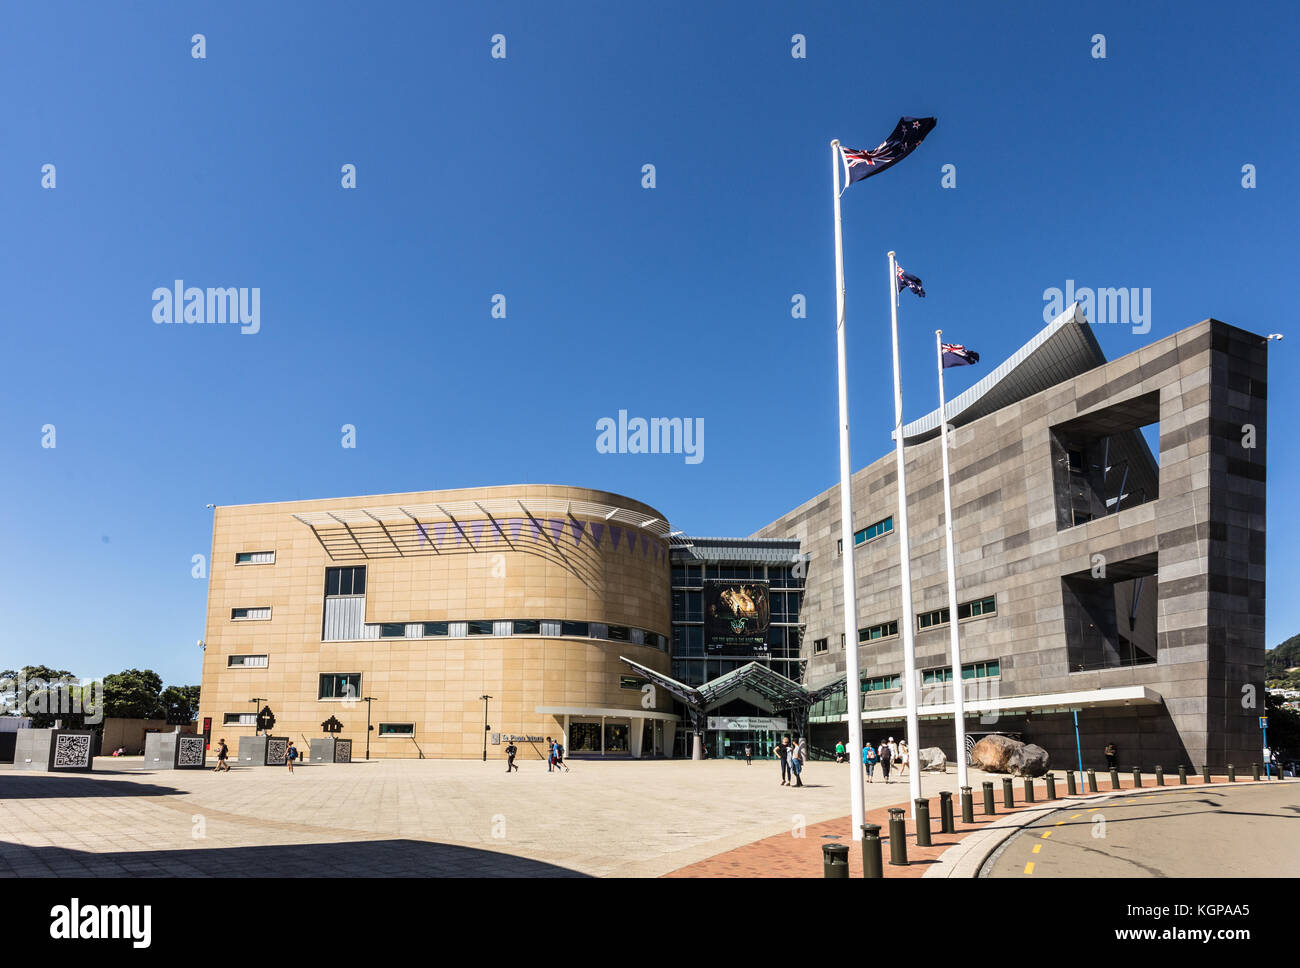 WELLINGTON, NEW ZEALAND - MARCH 1, 2017: Sculpture displayed in front of the Museum of New Zealand Te Papa Tongarewa in Wellingtion, New Zealand capit Stock Photo